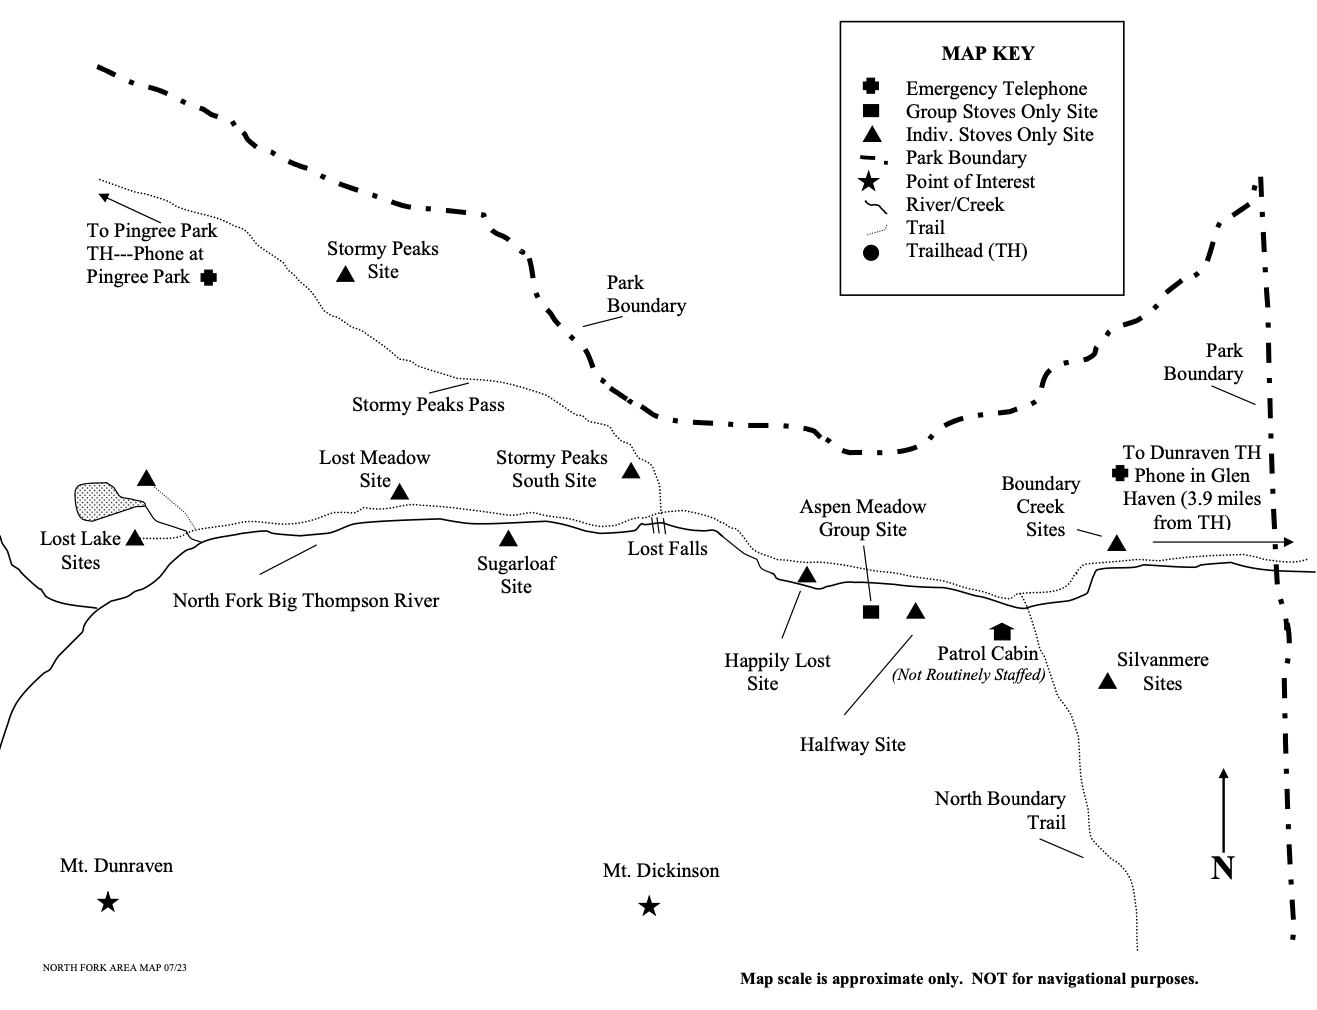 Drawing of North Fork Area Map showing location of wilderness campsites